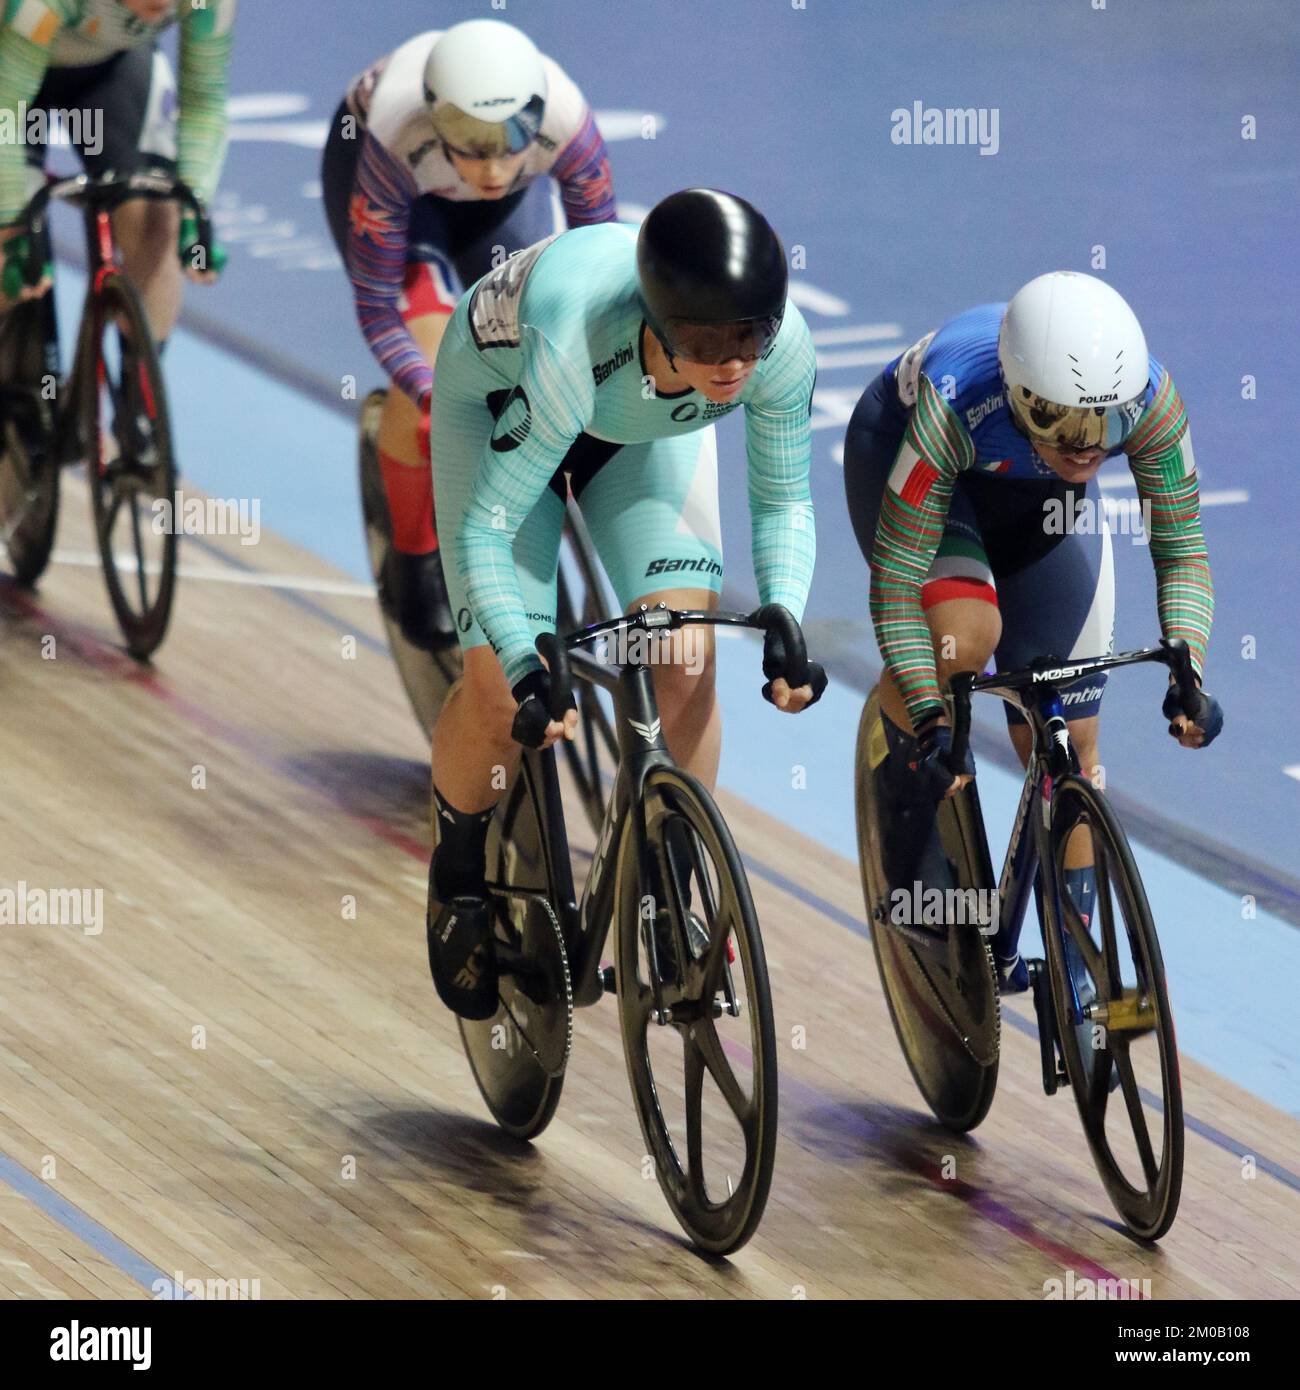 Track Cycling Champions League, Lee Valley Velodrome Londra UK. Jennifer VALENTE (USA) e Maggie COLES-LYSTER (CAN) in The Women's Scratch, 3rd Decem Foto Stock